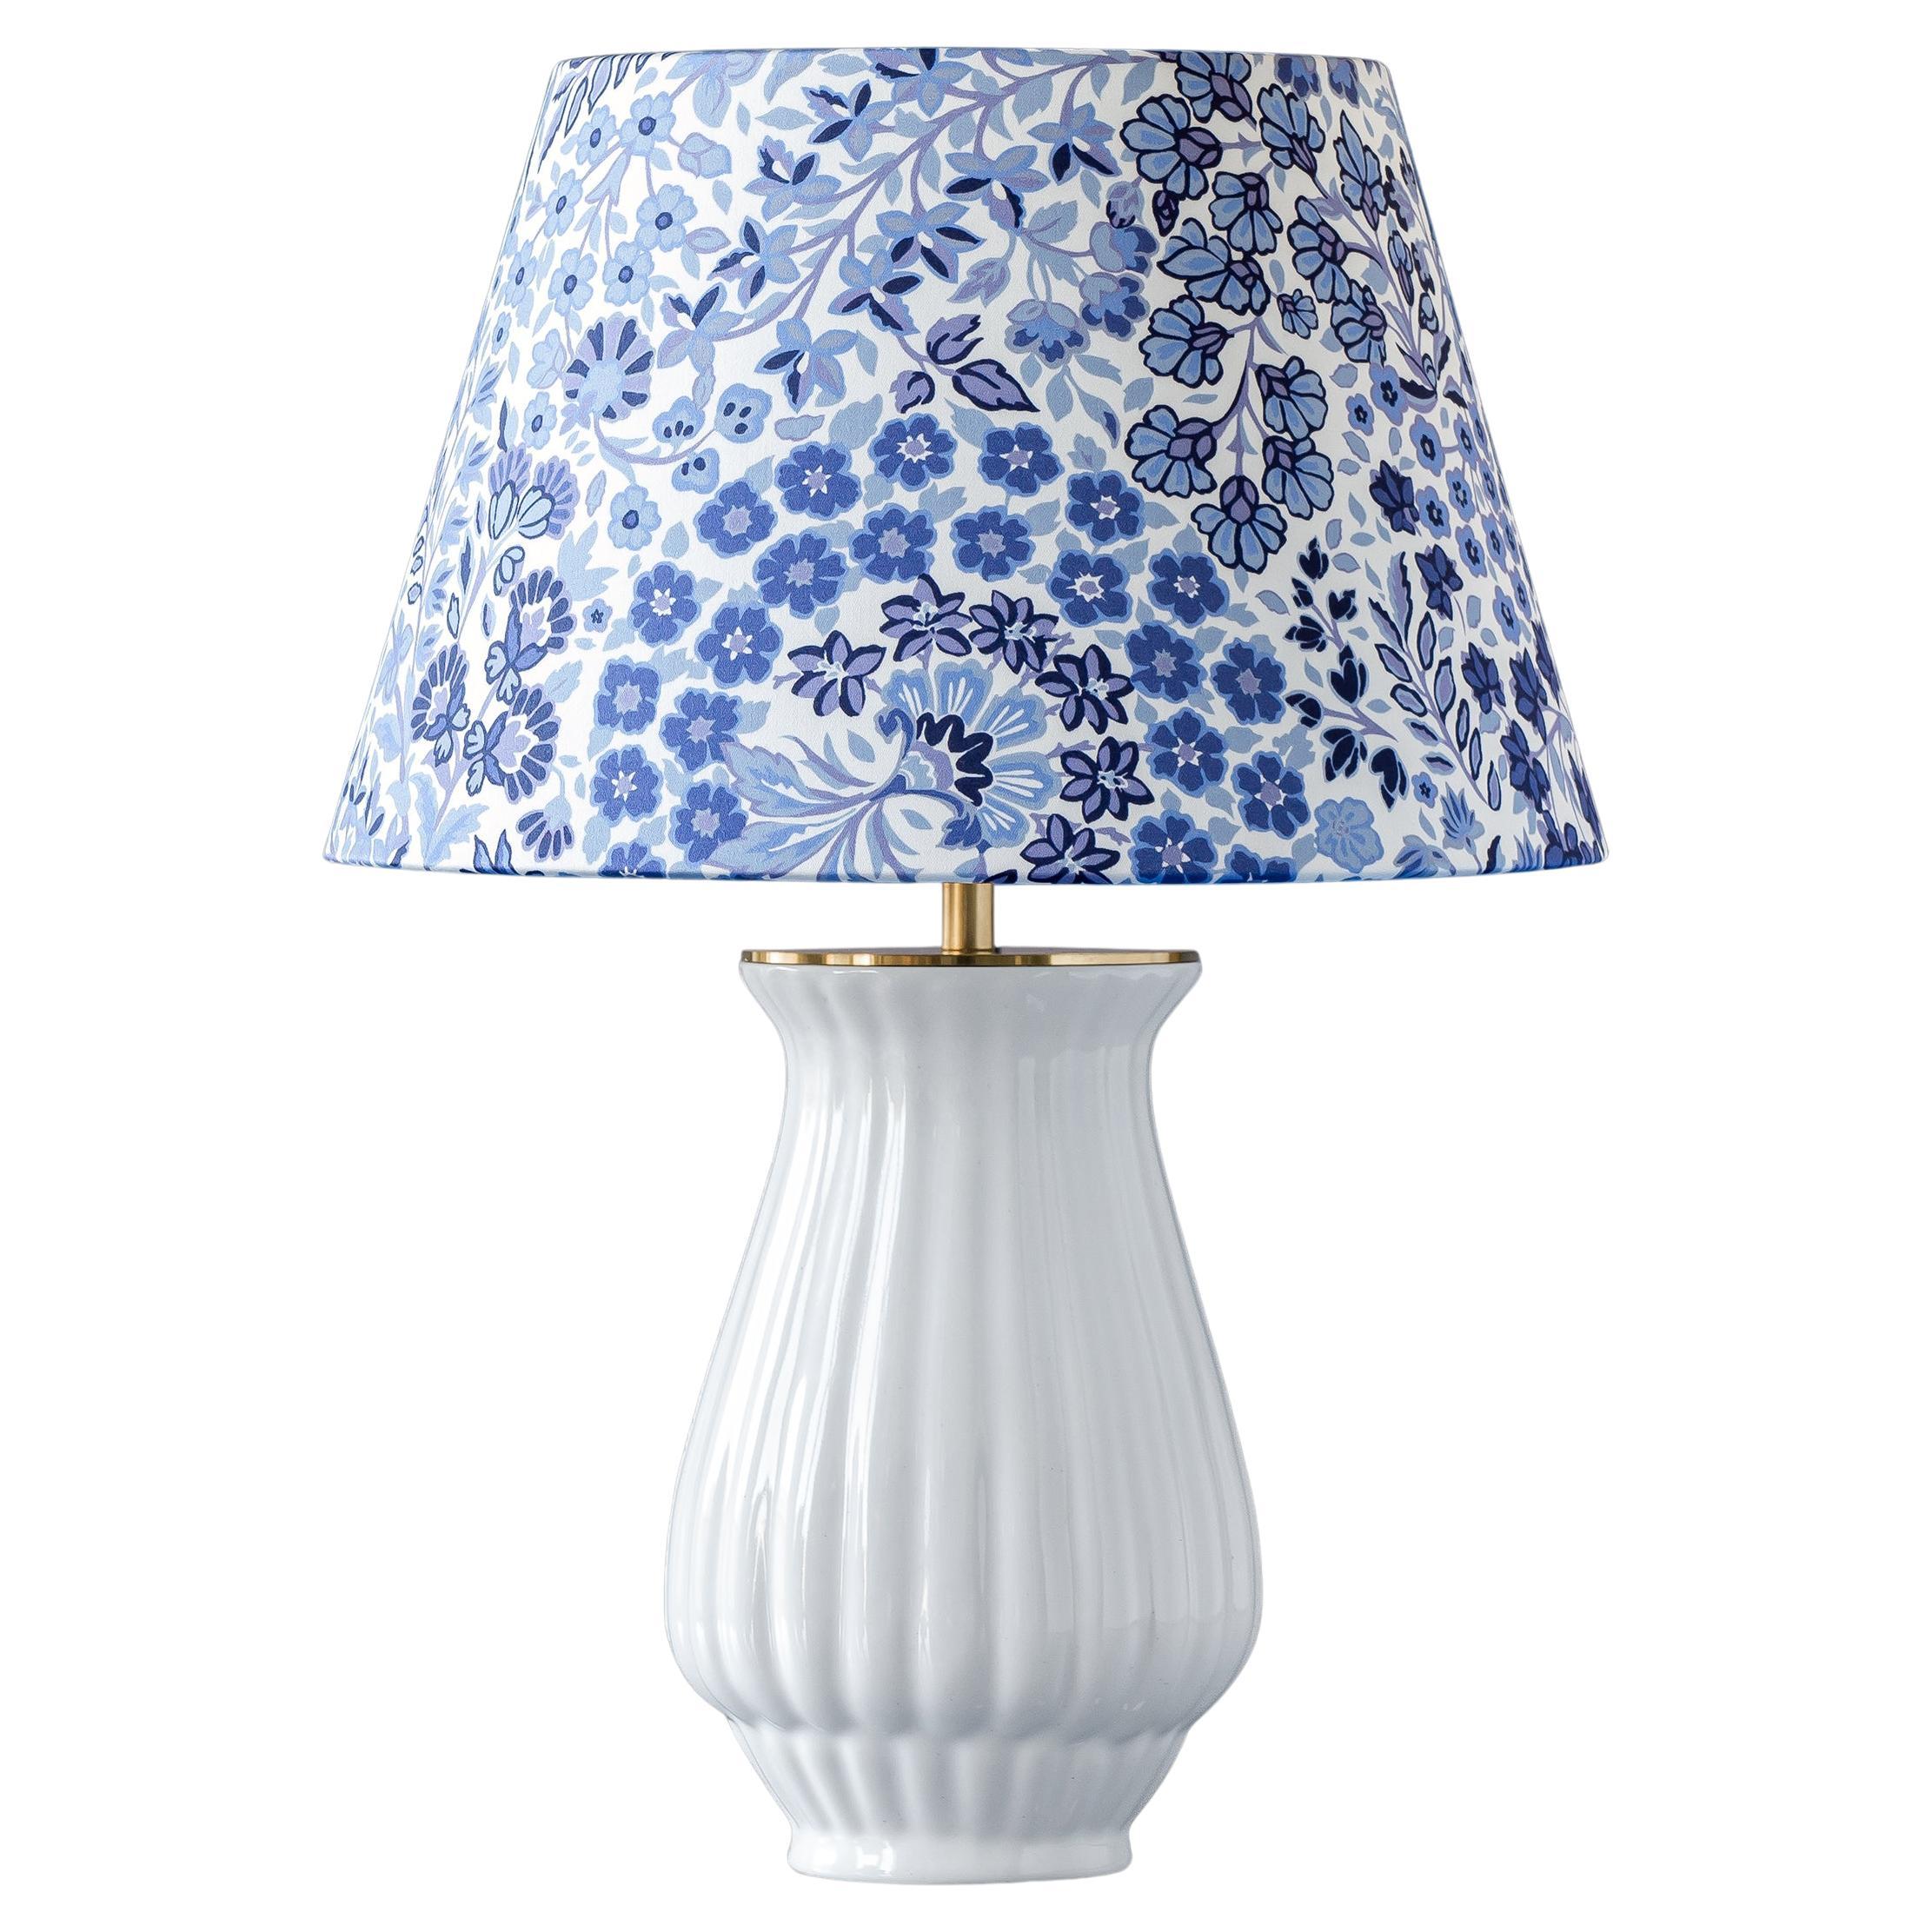 Royal Delft White Table Lamp + Liberty London Lampshade For Sale